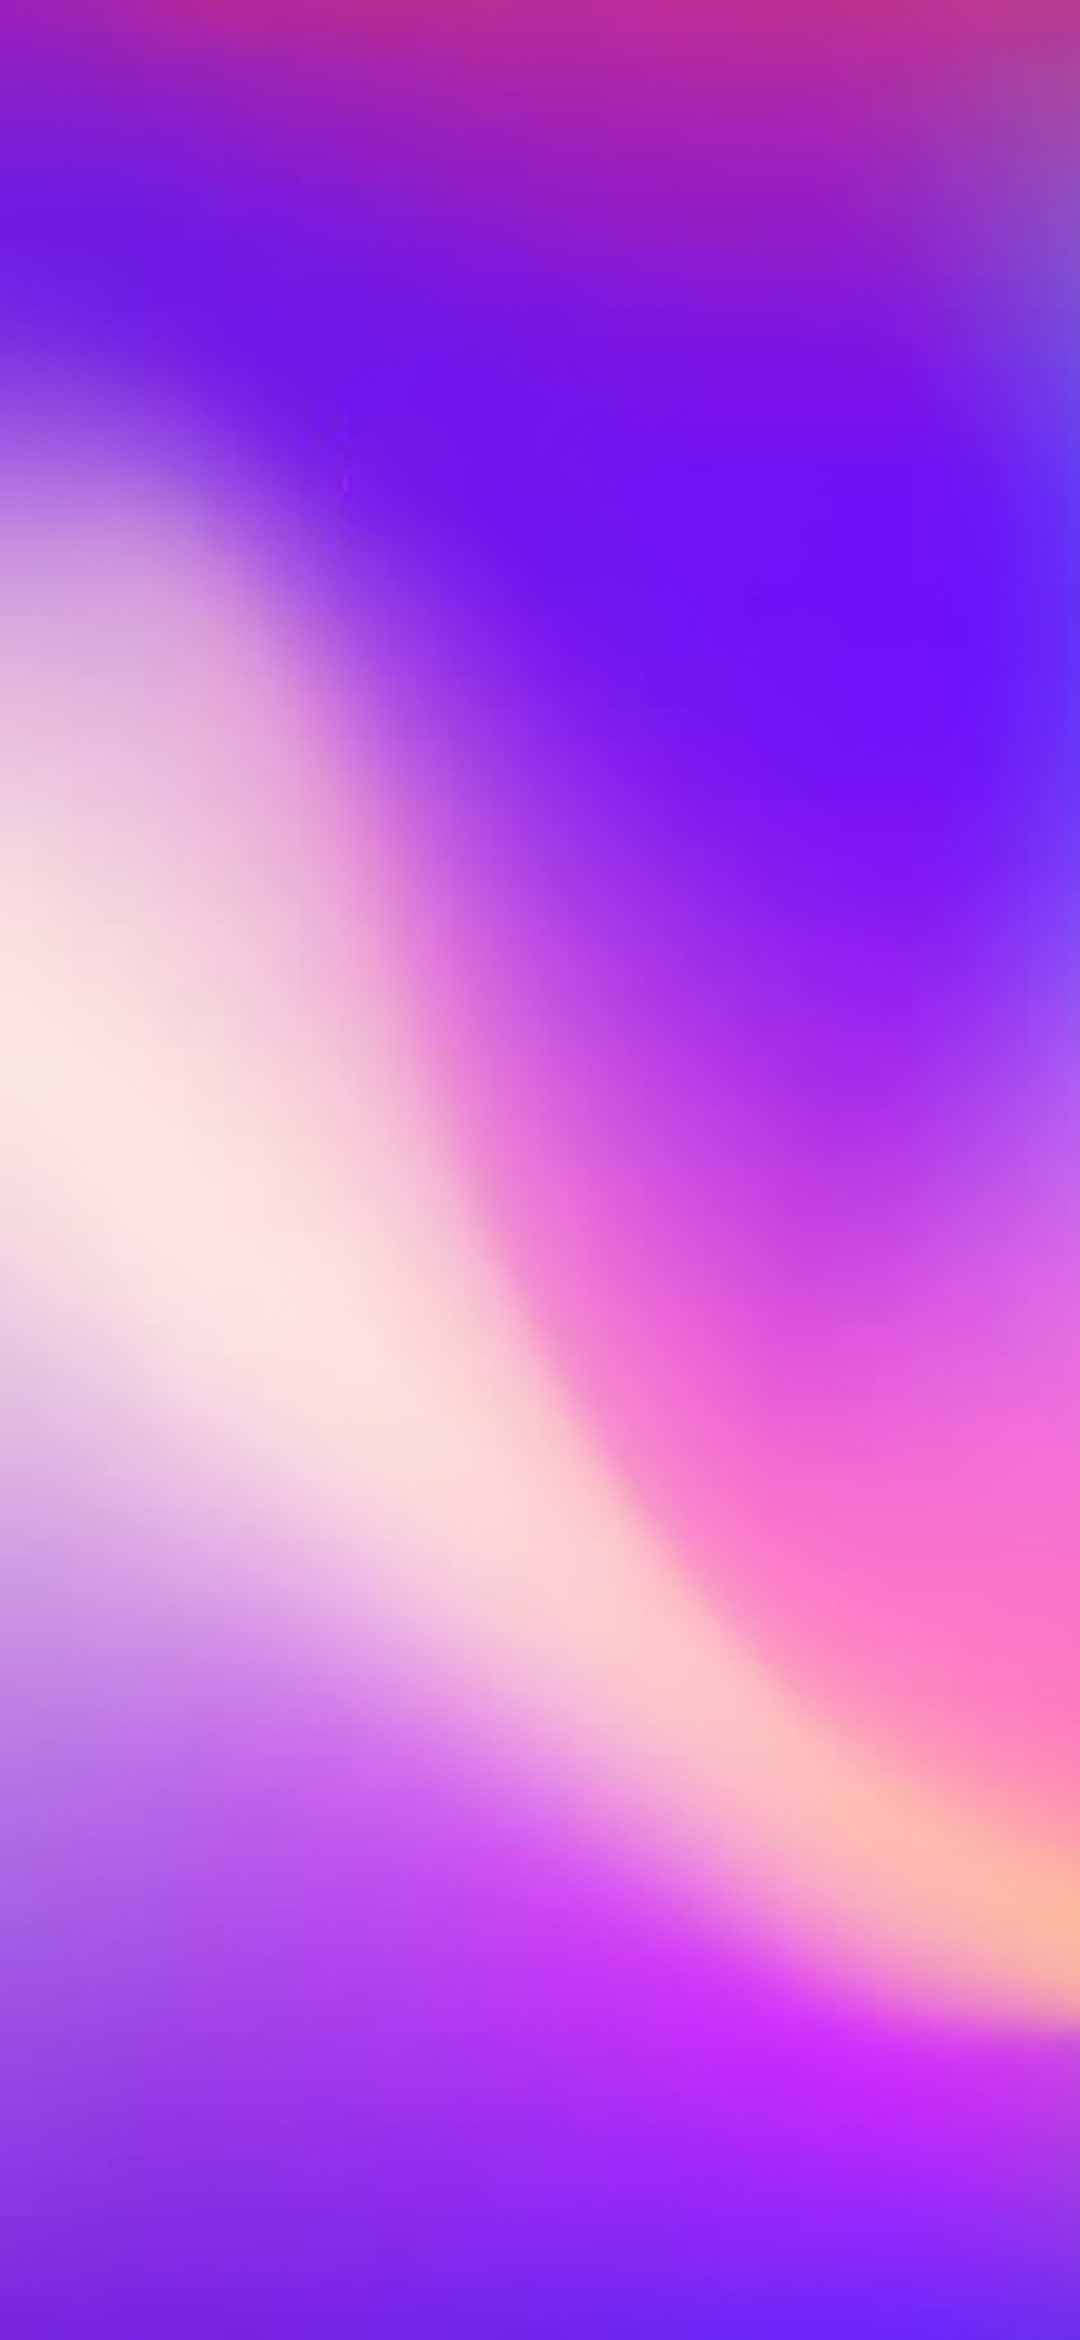 Redmi Note 7 and Redmi Note 7 Pro Wallpapers